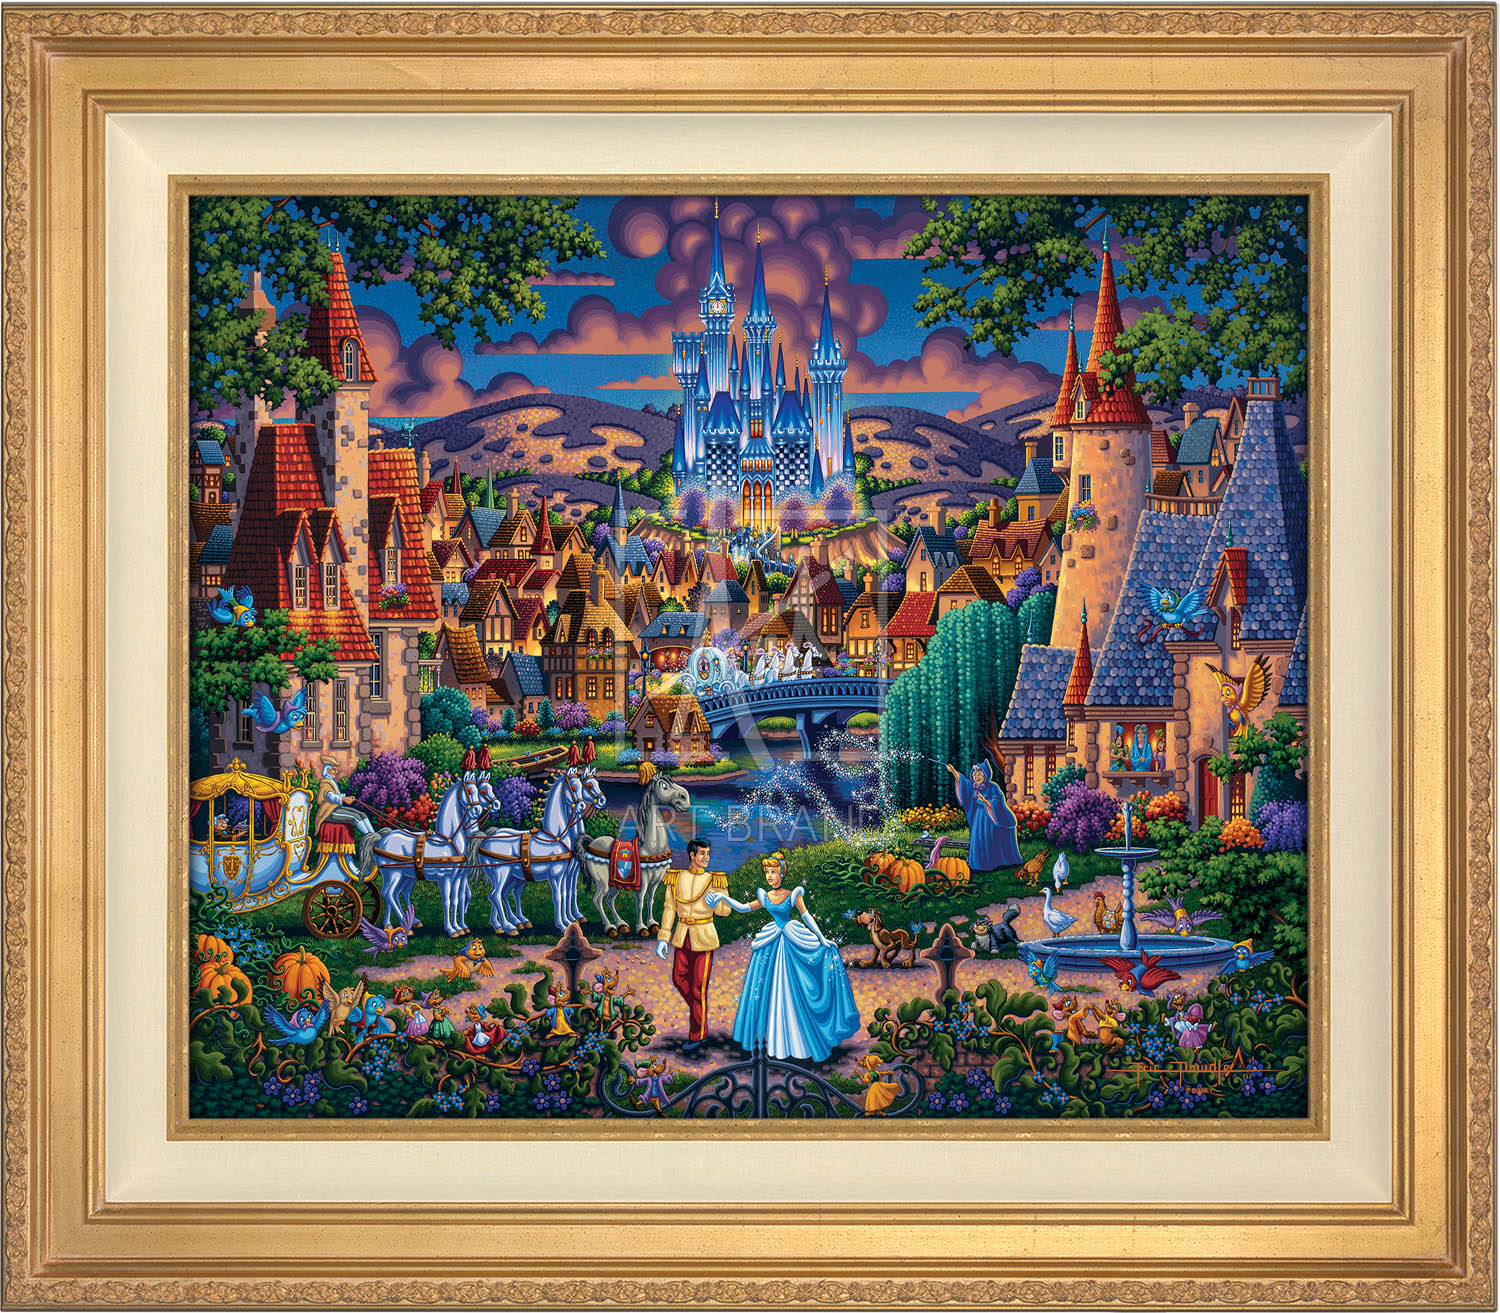 Cinderella's evening of celebration, surrounded by all the details of the story's fairy tale. Antique Gold Frame